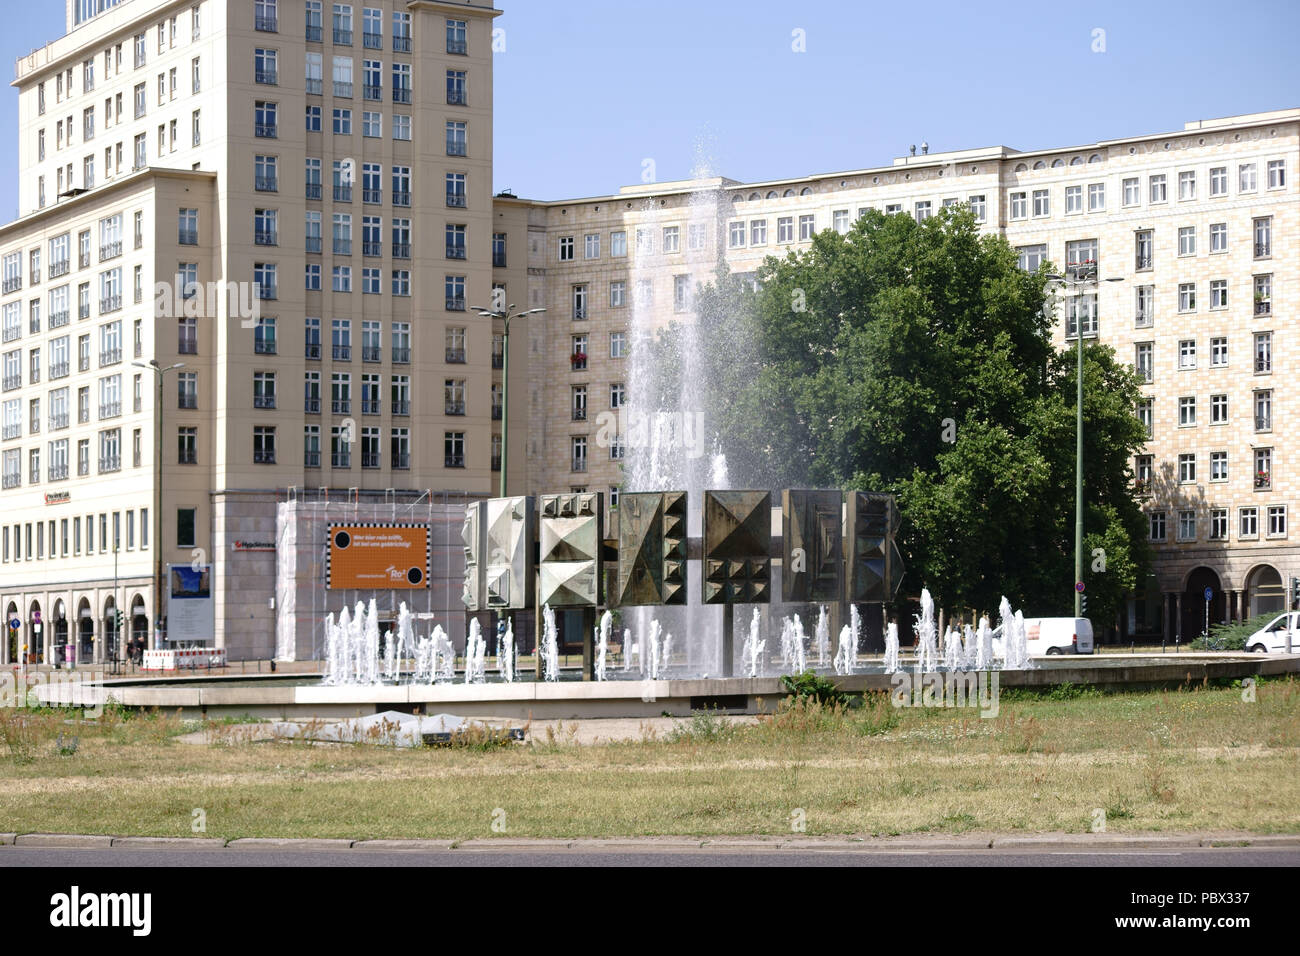 Berlin, Germany - July 13, 2018: The water of the fountain Schwebender Ring on the Strausberger Square and at Karl-Marx-Alley on July 13, 2018 in Berl Stock Photo